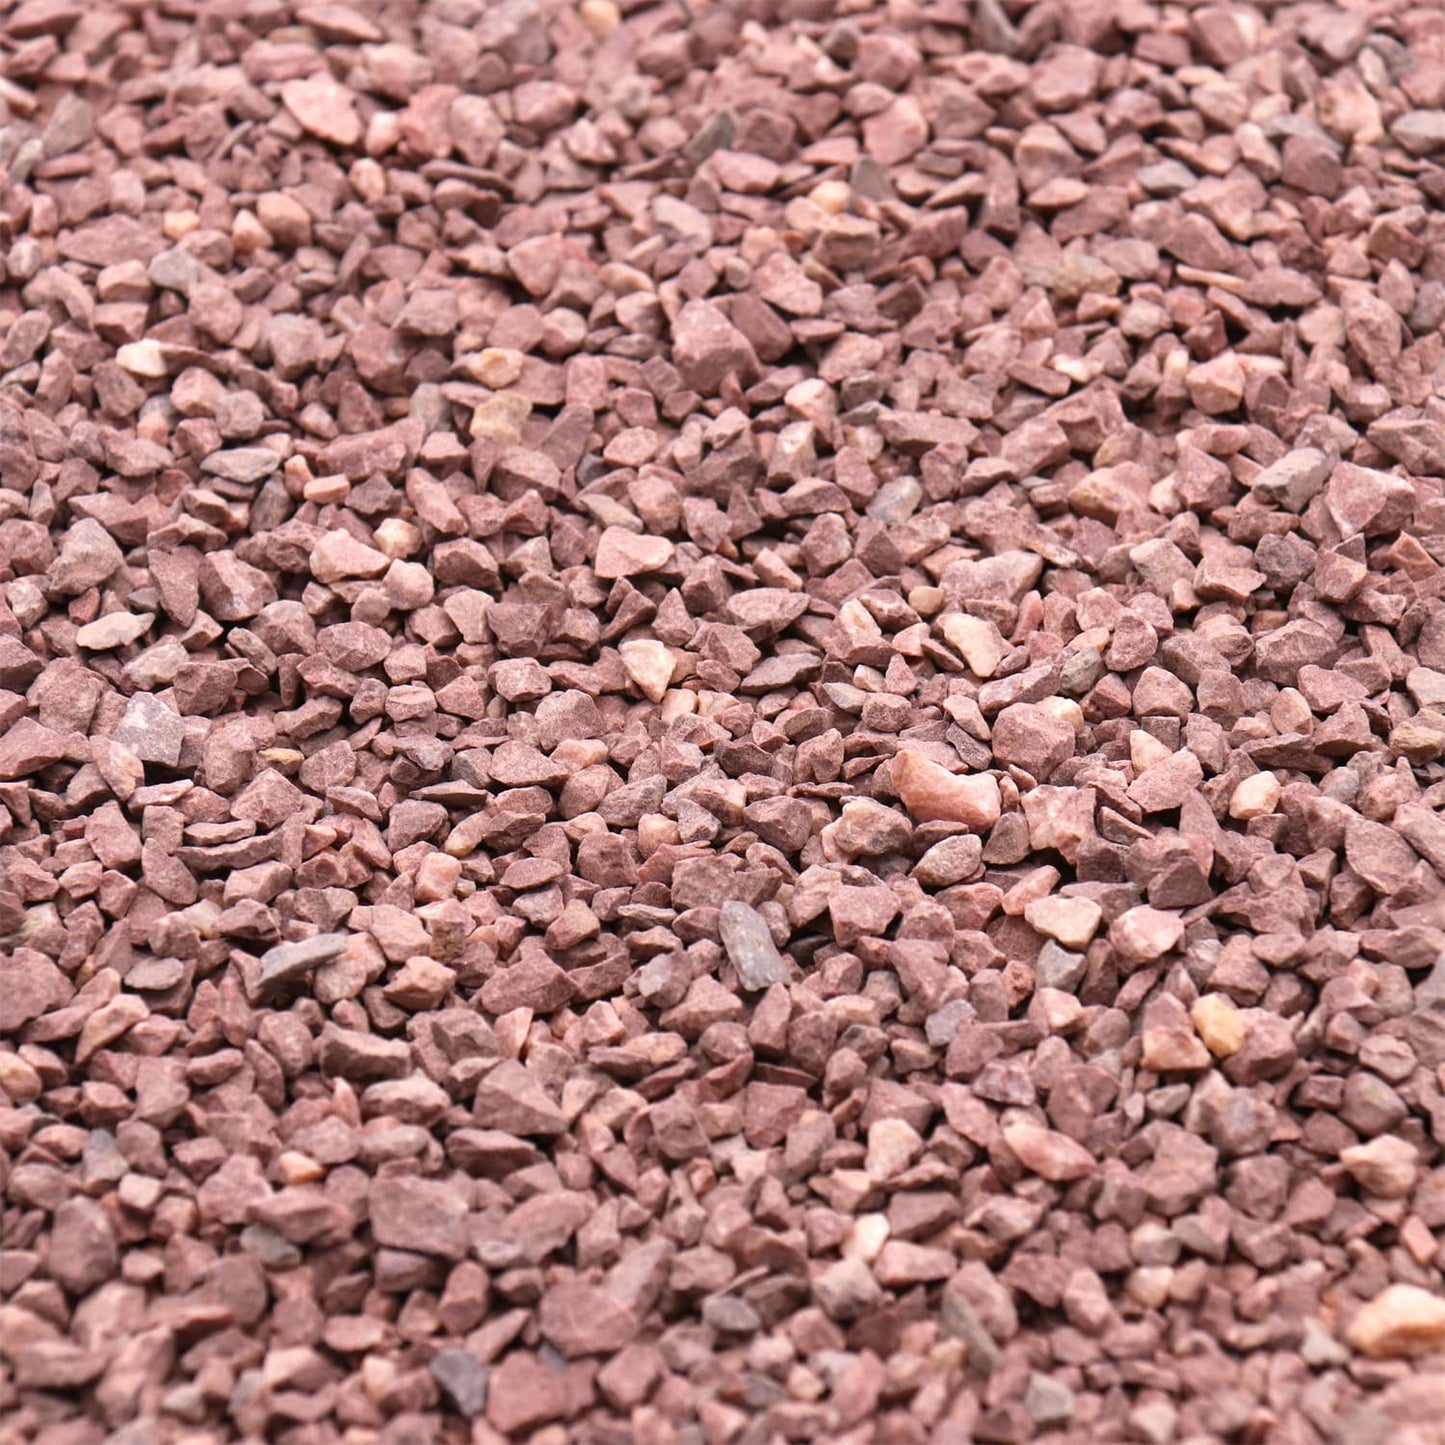 Premium Pebbles Coarse Sand. Red Color. 1/8 Inch 10 lbs. for Potting Soil, Succulents, Pots, Plants, Gardening, Indoor, Crafting, Vase Fillers, Landscaping (X-Mini, COARSE Sand - RED, 10)